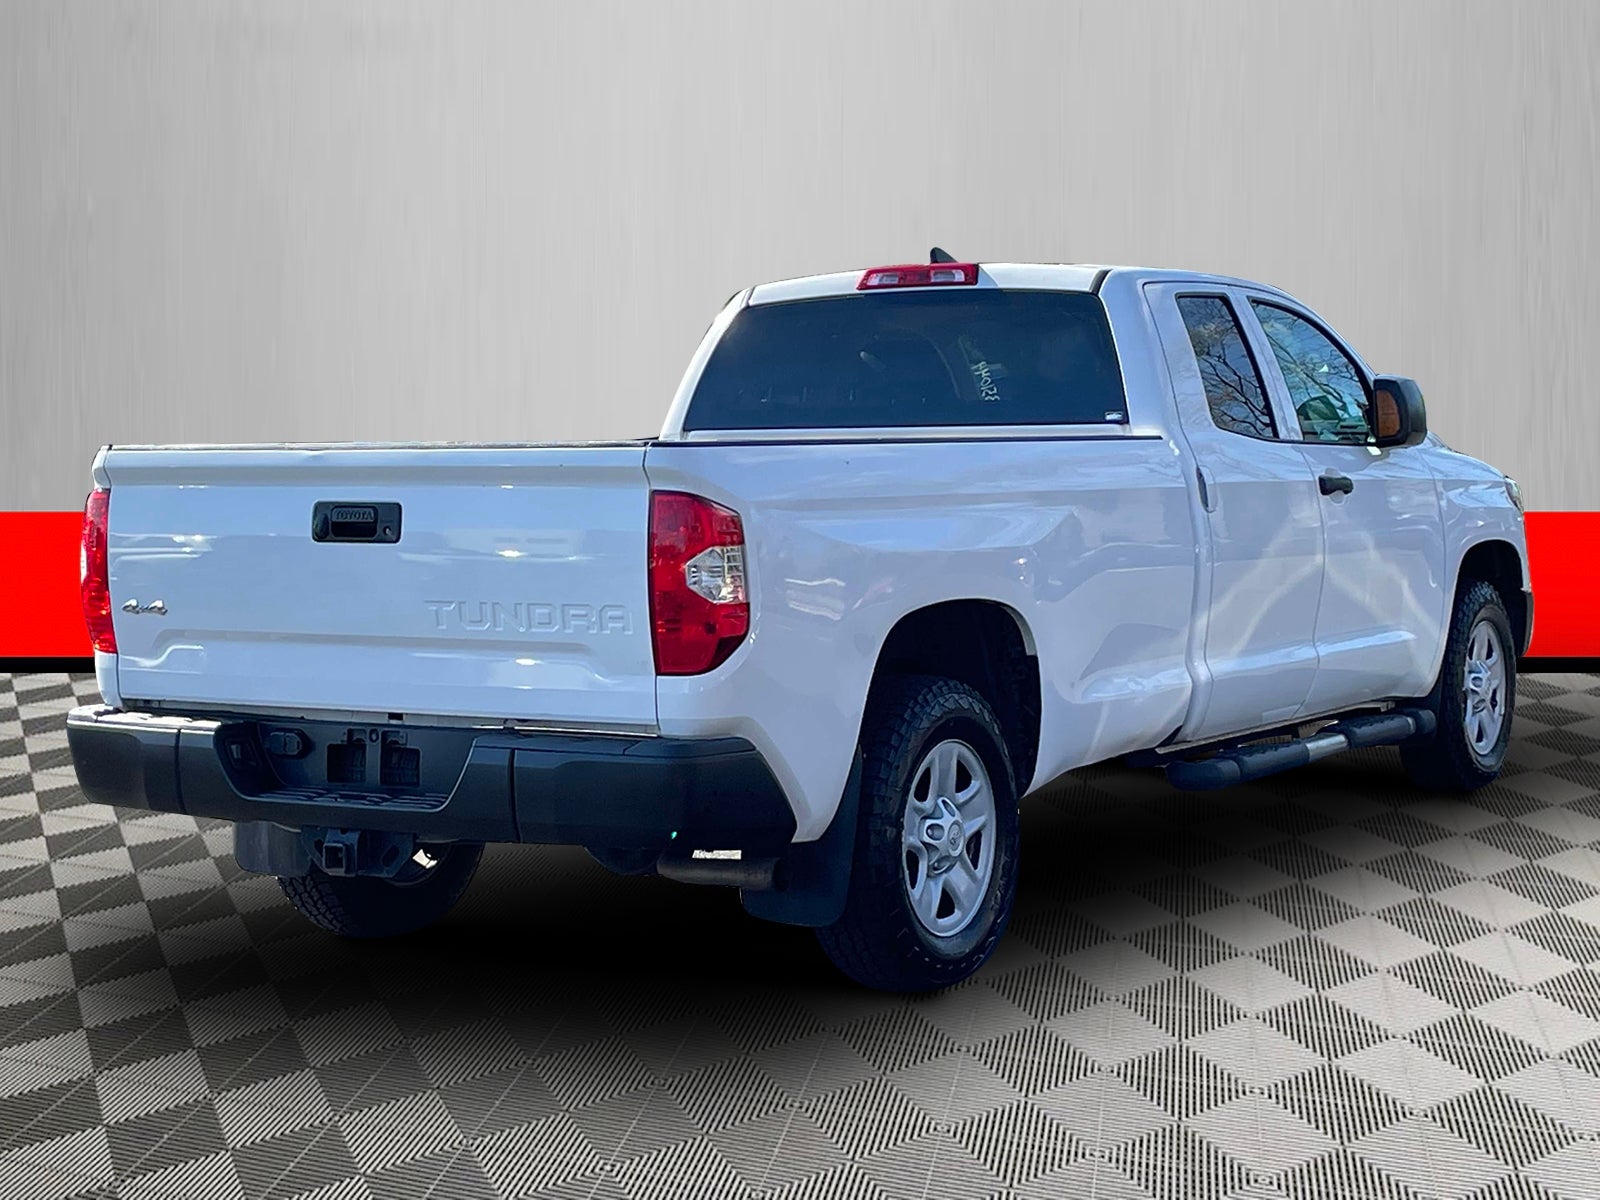 2021 Toyota Tundra 4WD SR Double Cab 8.1' Bed 5.7L (Natl)